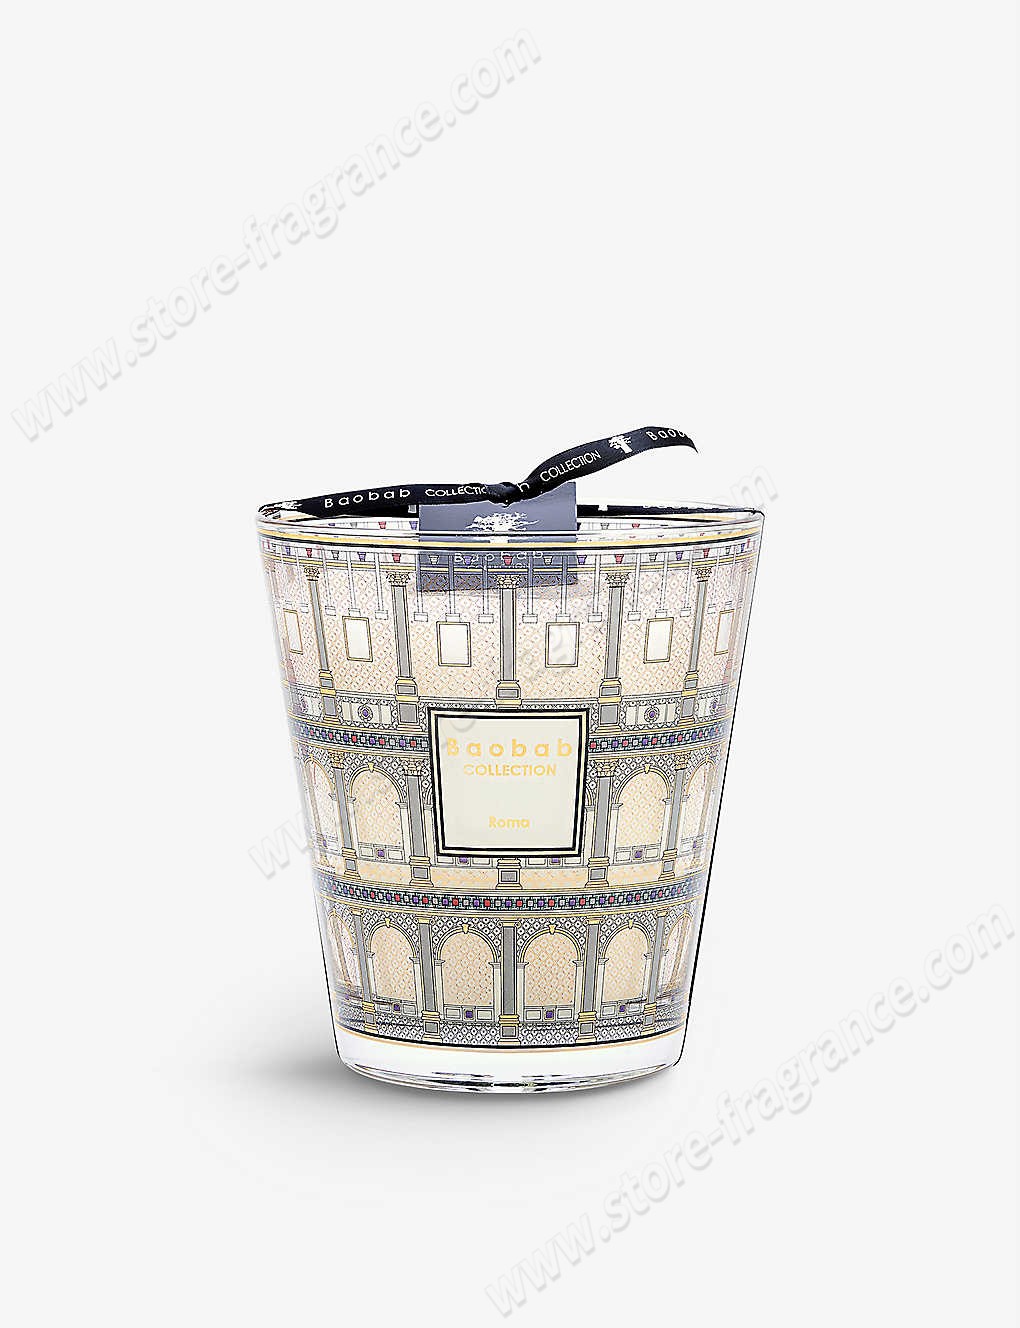 BAOBAB COLLECTION/Cities Roma scented candle 1.1kg ✿ Discount Store - BAOBAB COLLECTION/Cities Roma scented candle 1.1kg ✿ Discount Store